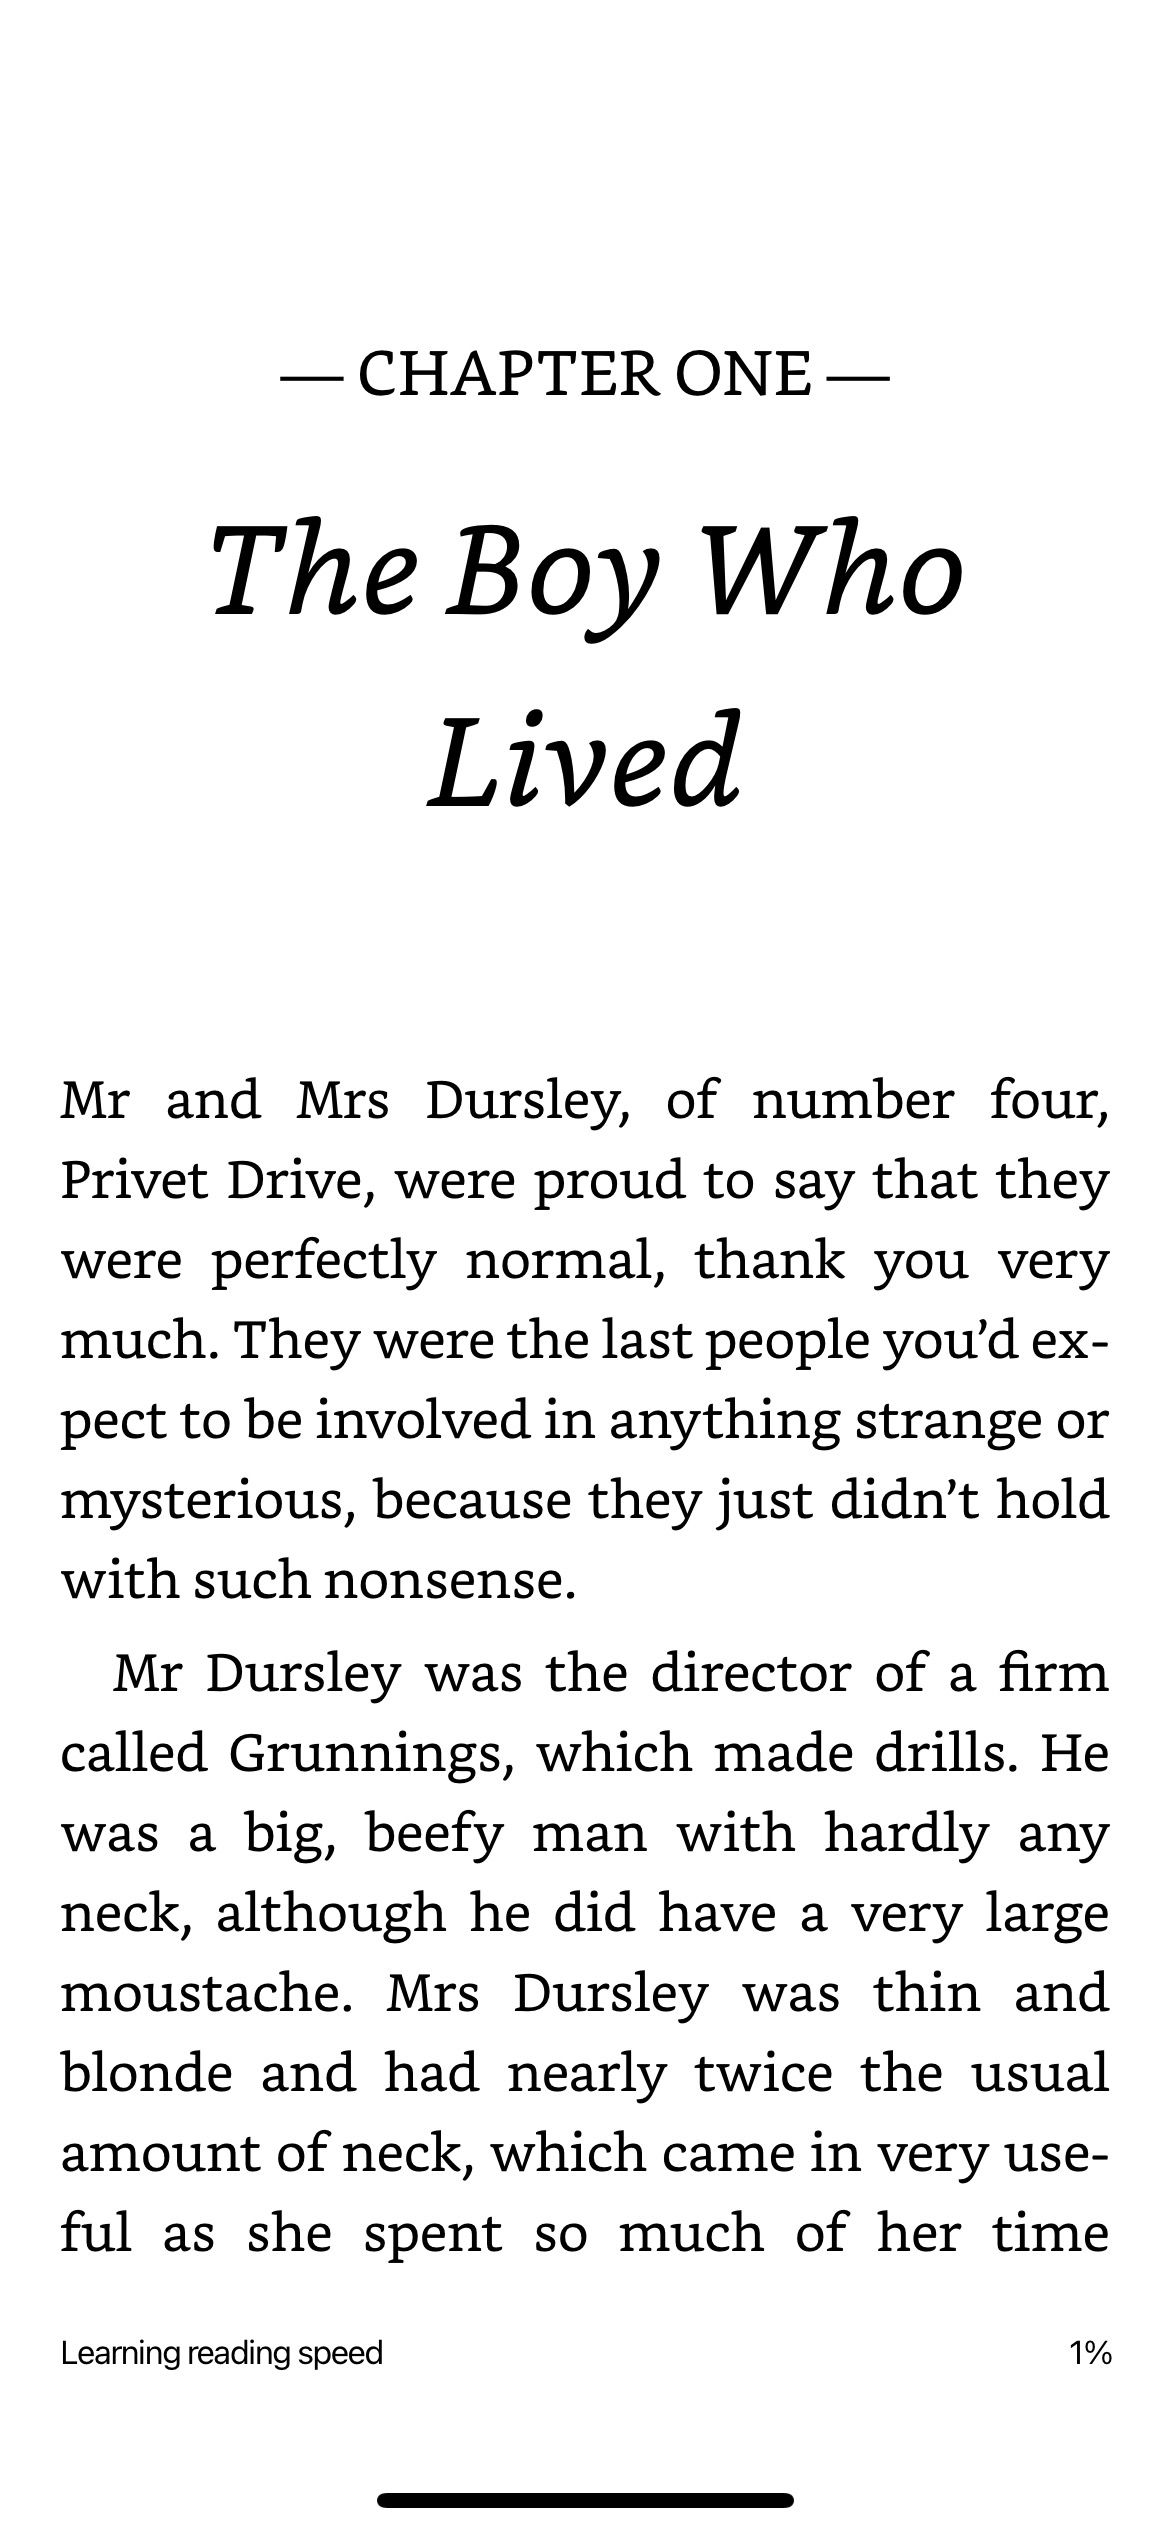 chapter one of harry potter book on kindle app